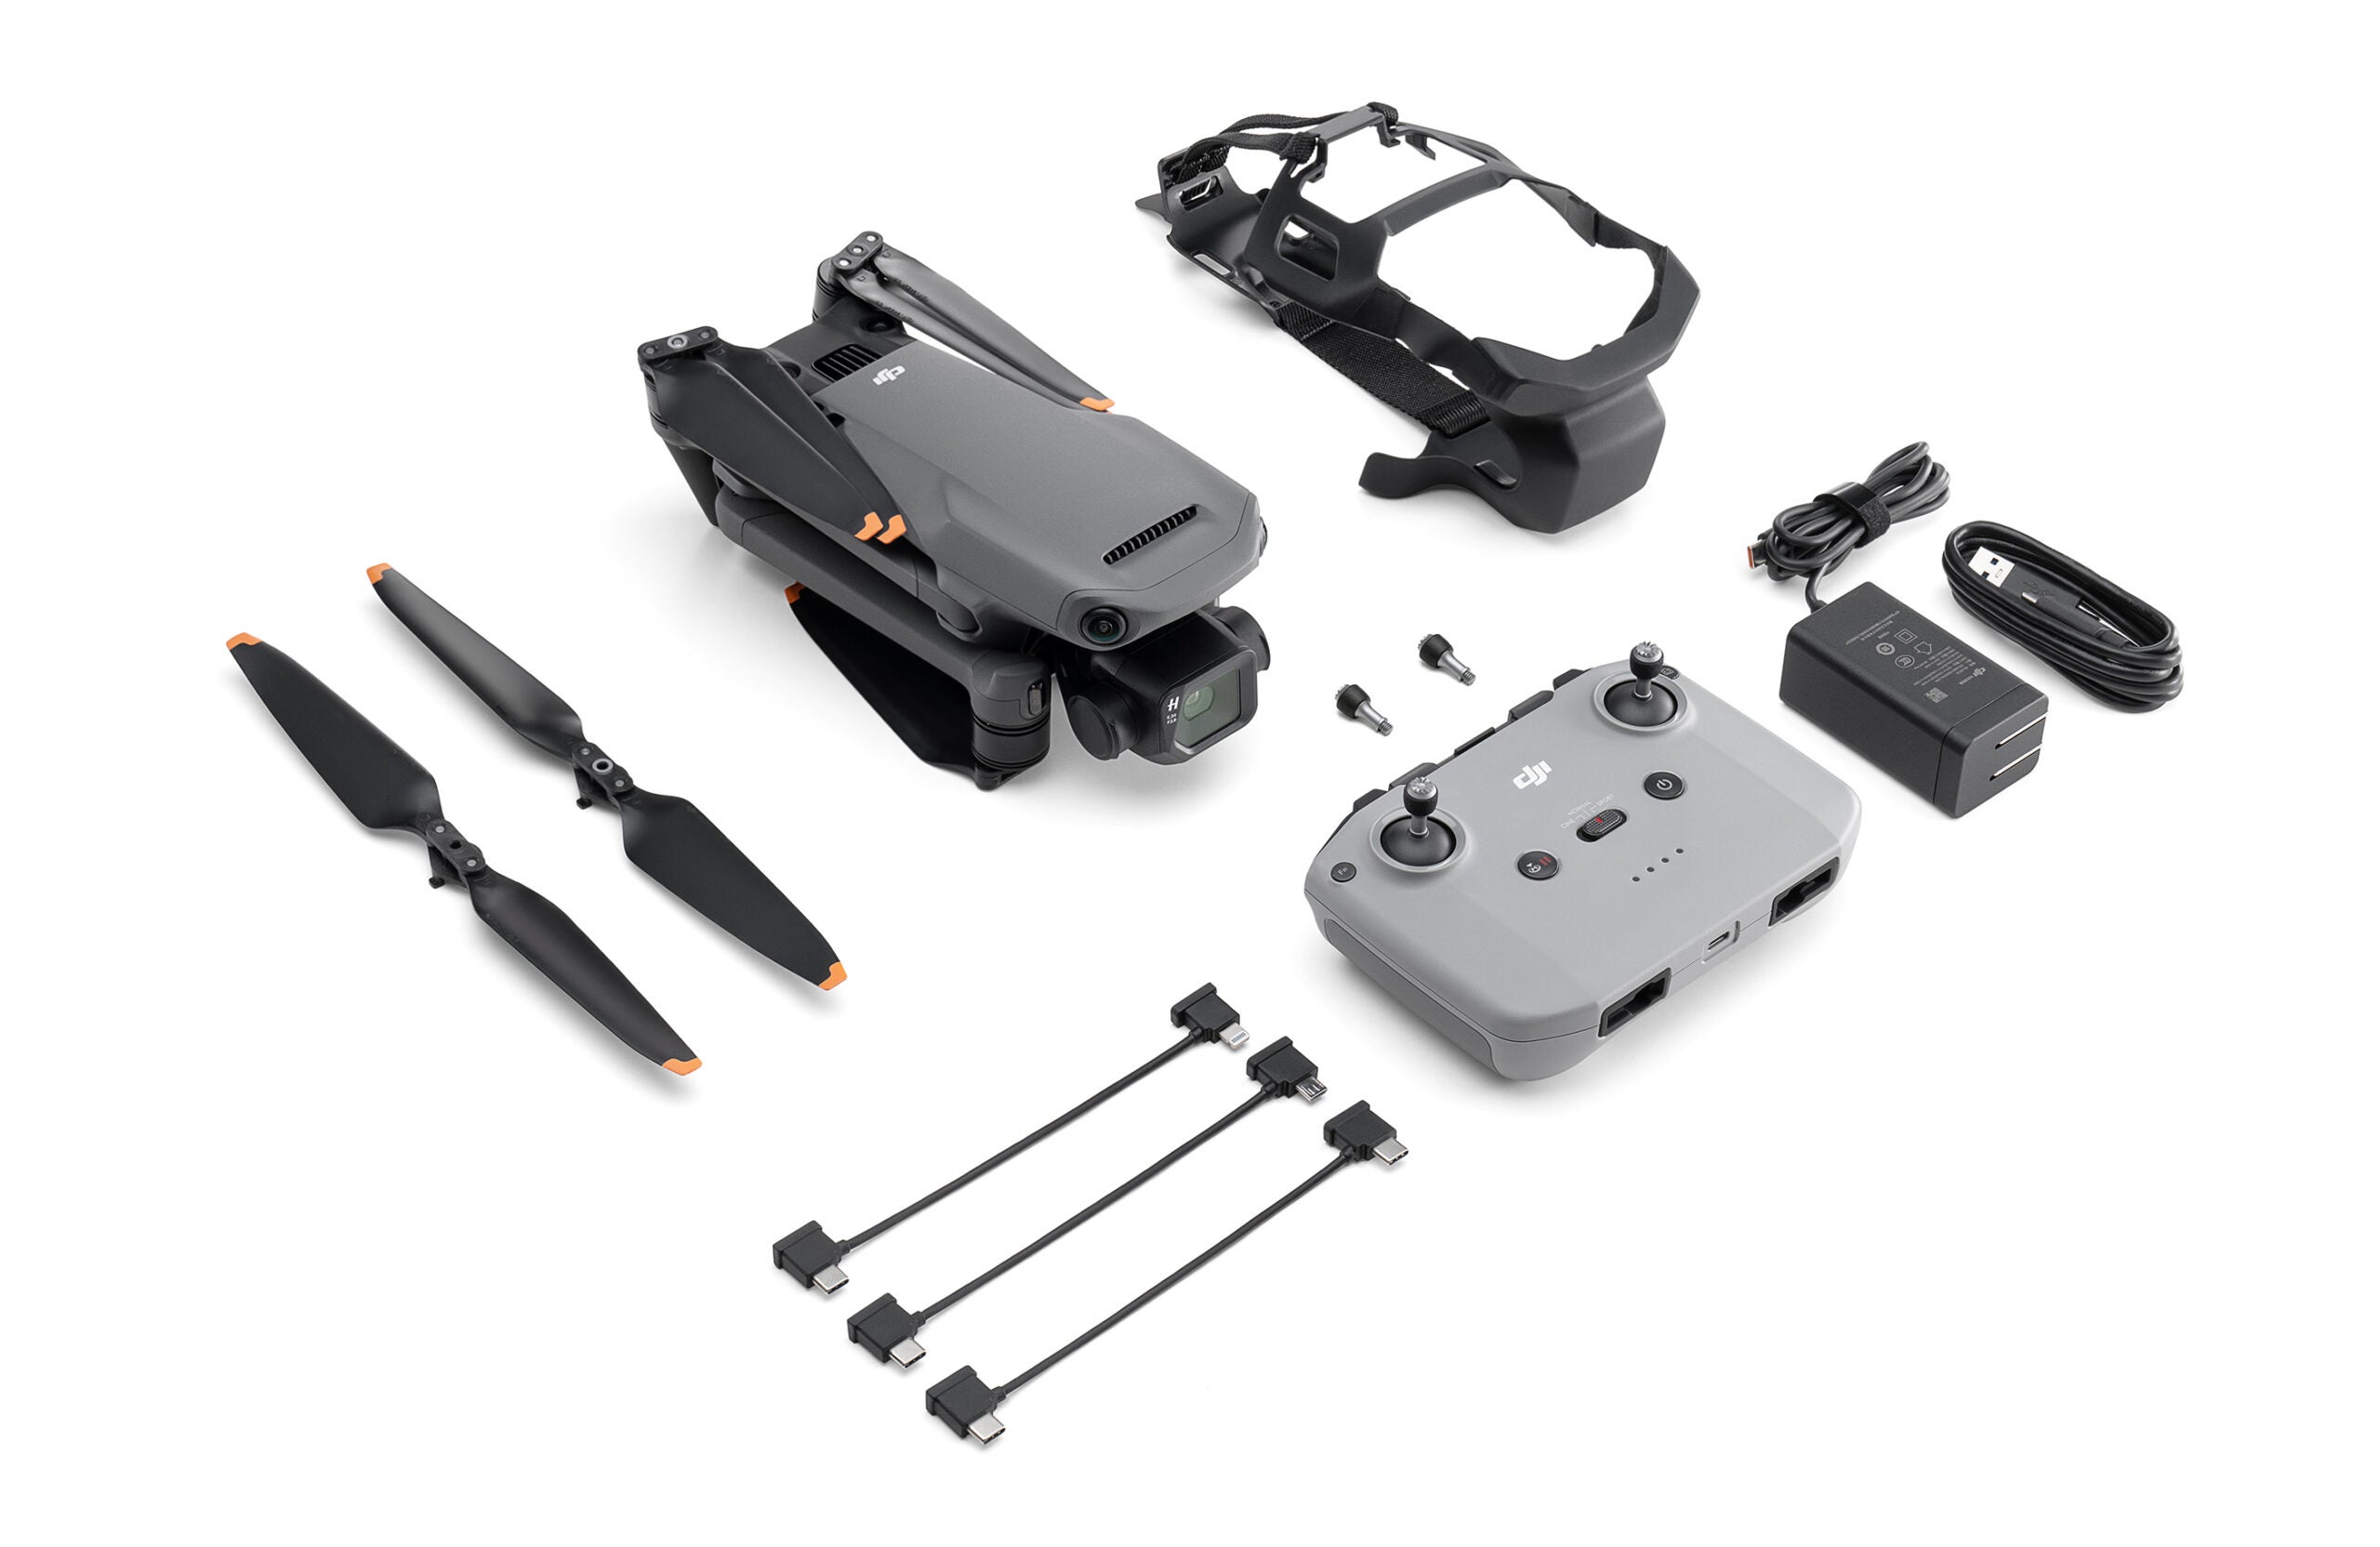 The Mavic 3 Classic is sold in multiple bundle configurations.